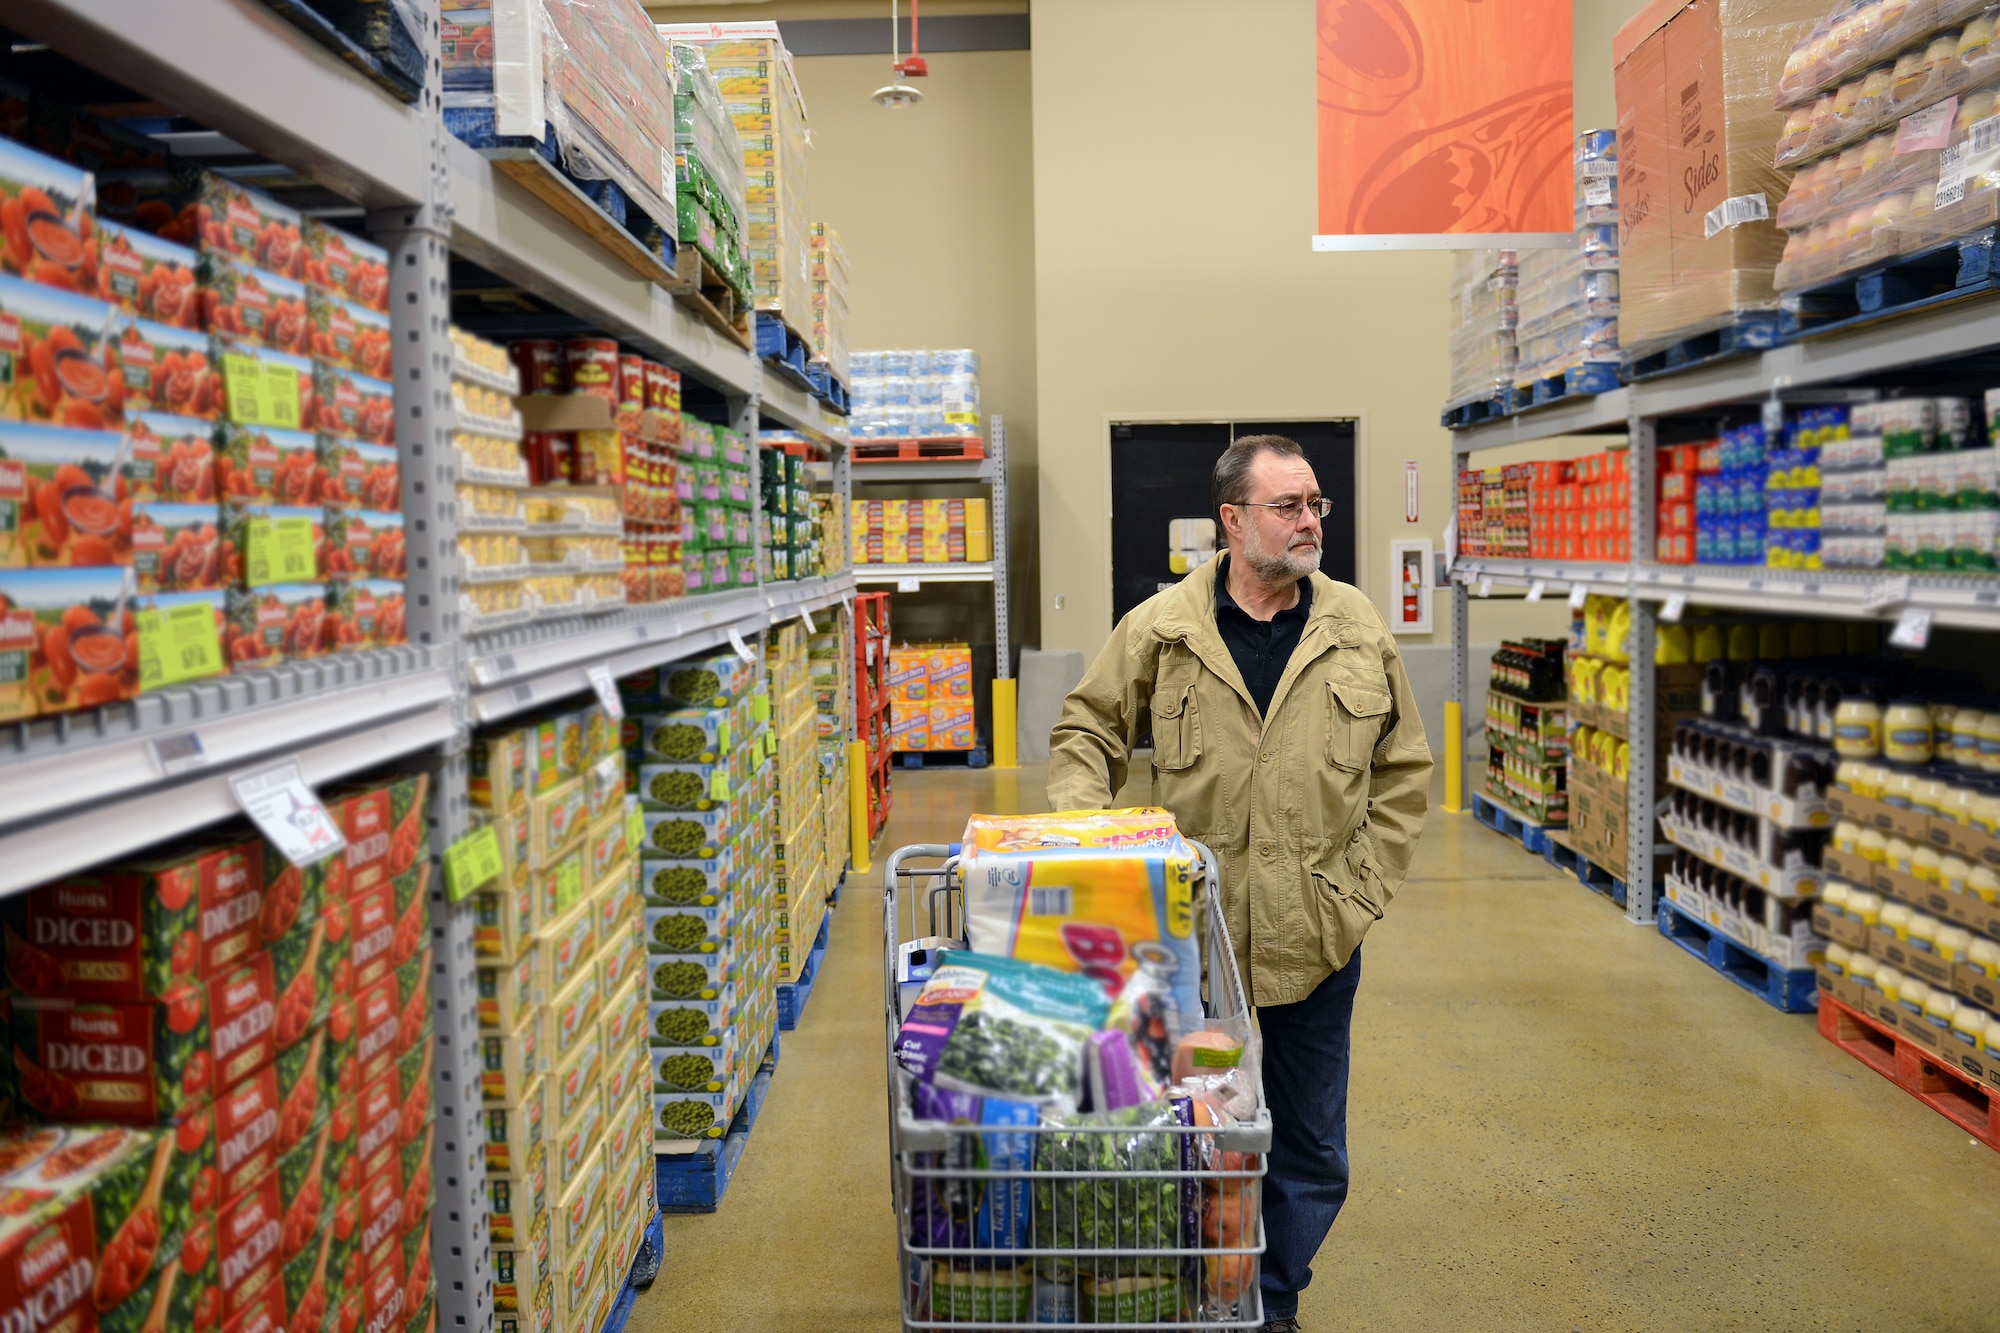 Edward Fisher, Army retiree shops the Commissary Club section during its grand opening March 7, 2014 at Joint Base Lewis-McChord, Wash. The new Commissary Club is an addition at the back of the McChord Field Commissary sales floor and is open to all Department of Defense ID card holders. (U.S. Air Force Photo/Airman 1st Class Jacob Jimenez)